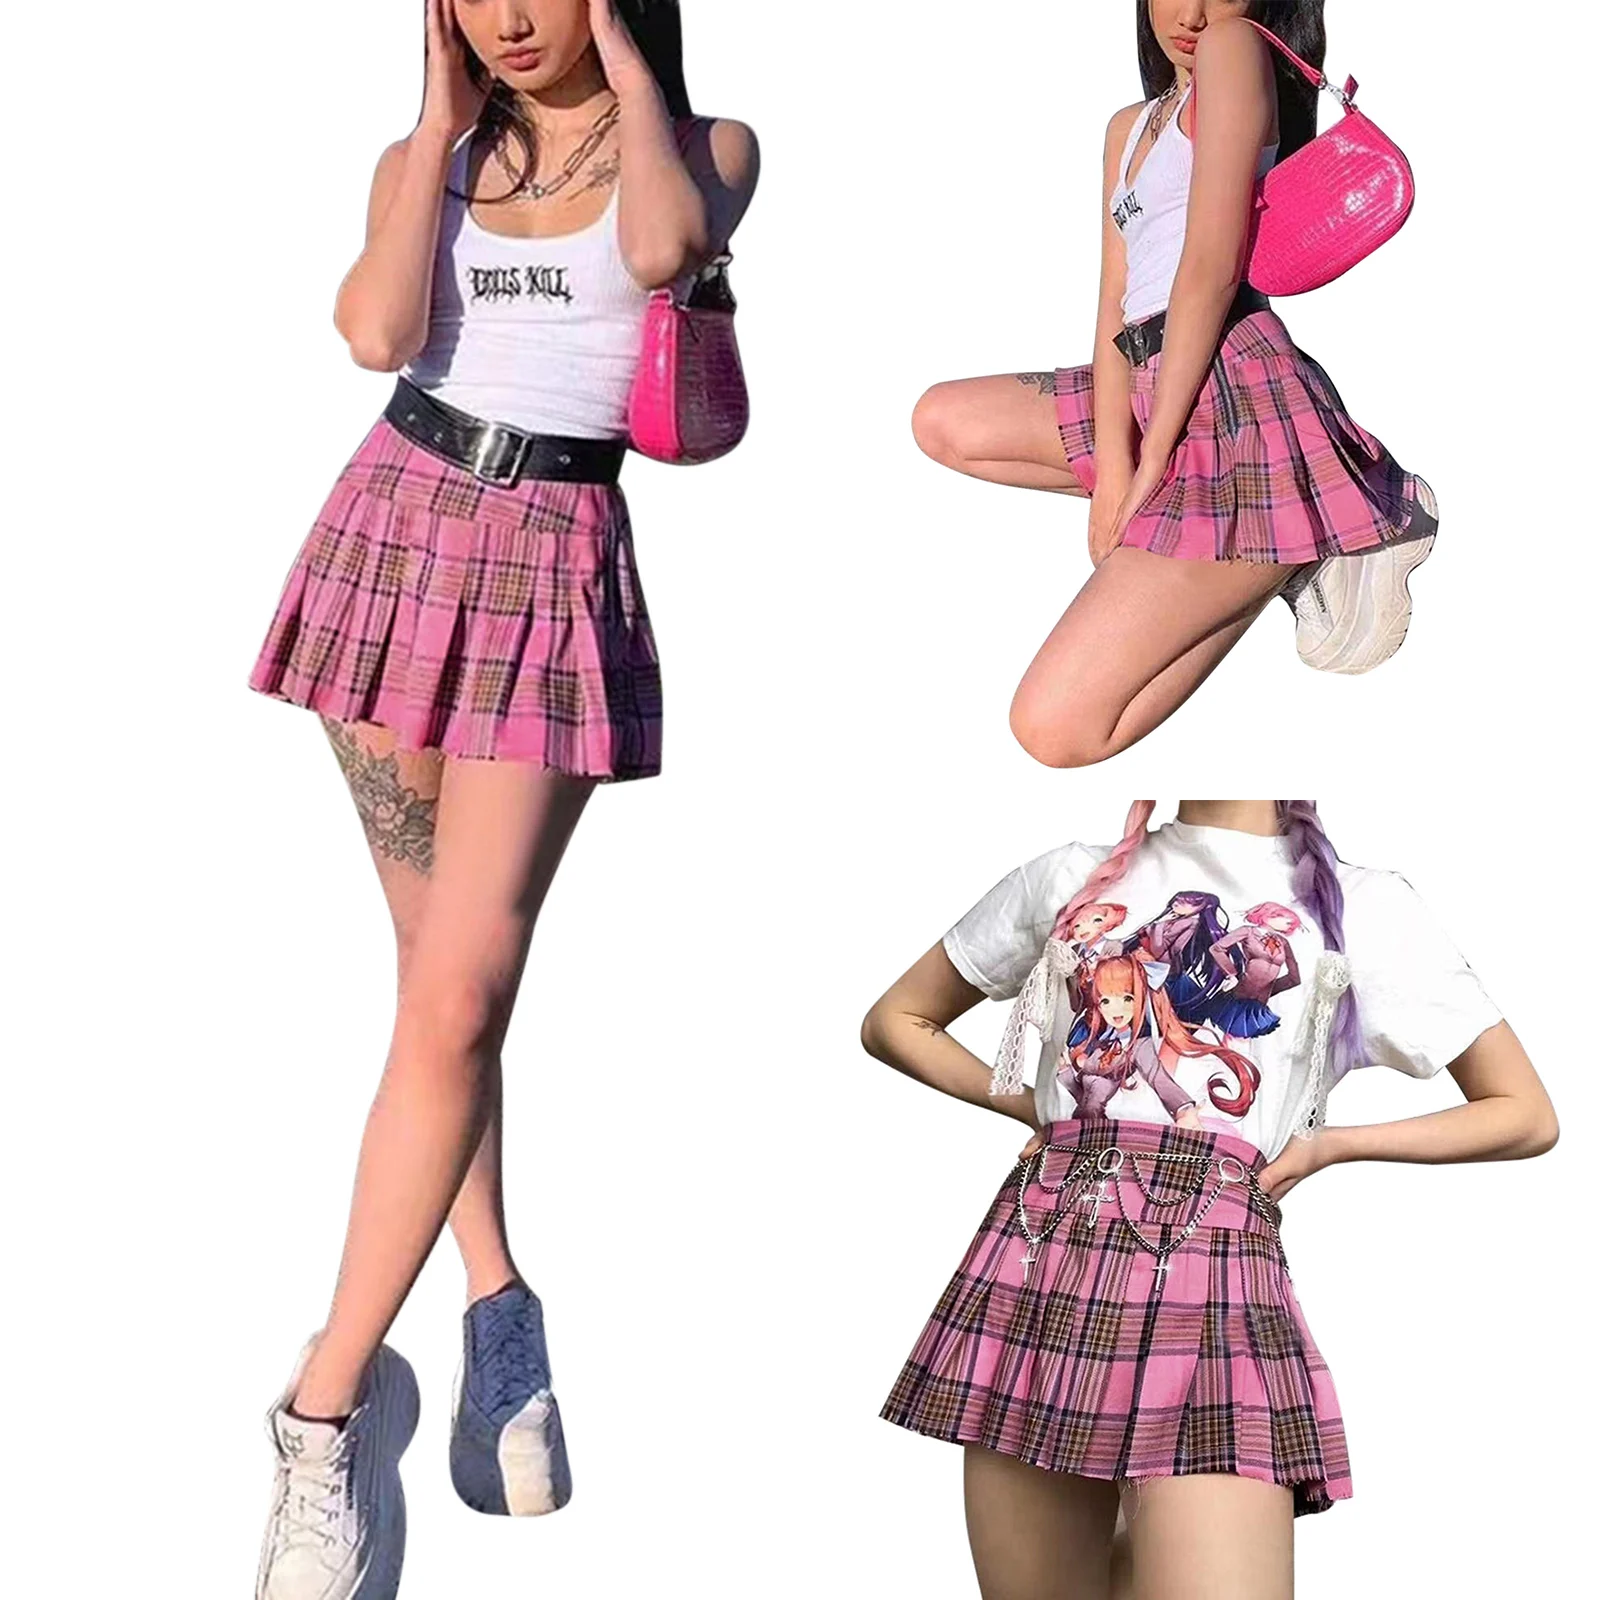 

2021 New Women High Waist Plaid Short Mini Skirts Preppy Style Ladies Sweet Pleated Plaid Skirts Summer For Young Girls